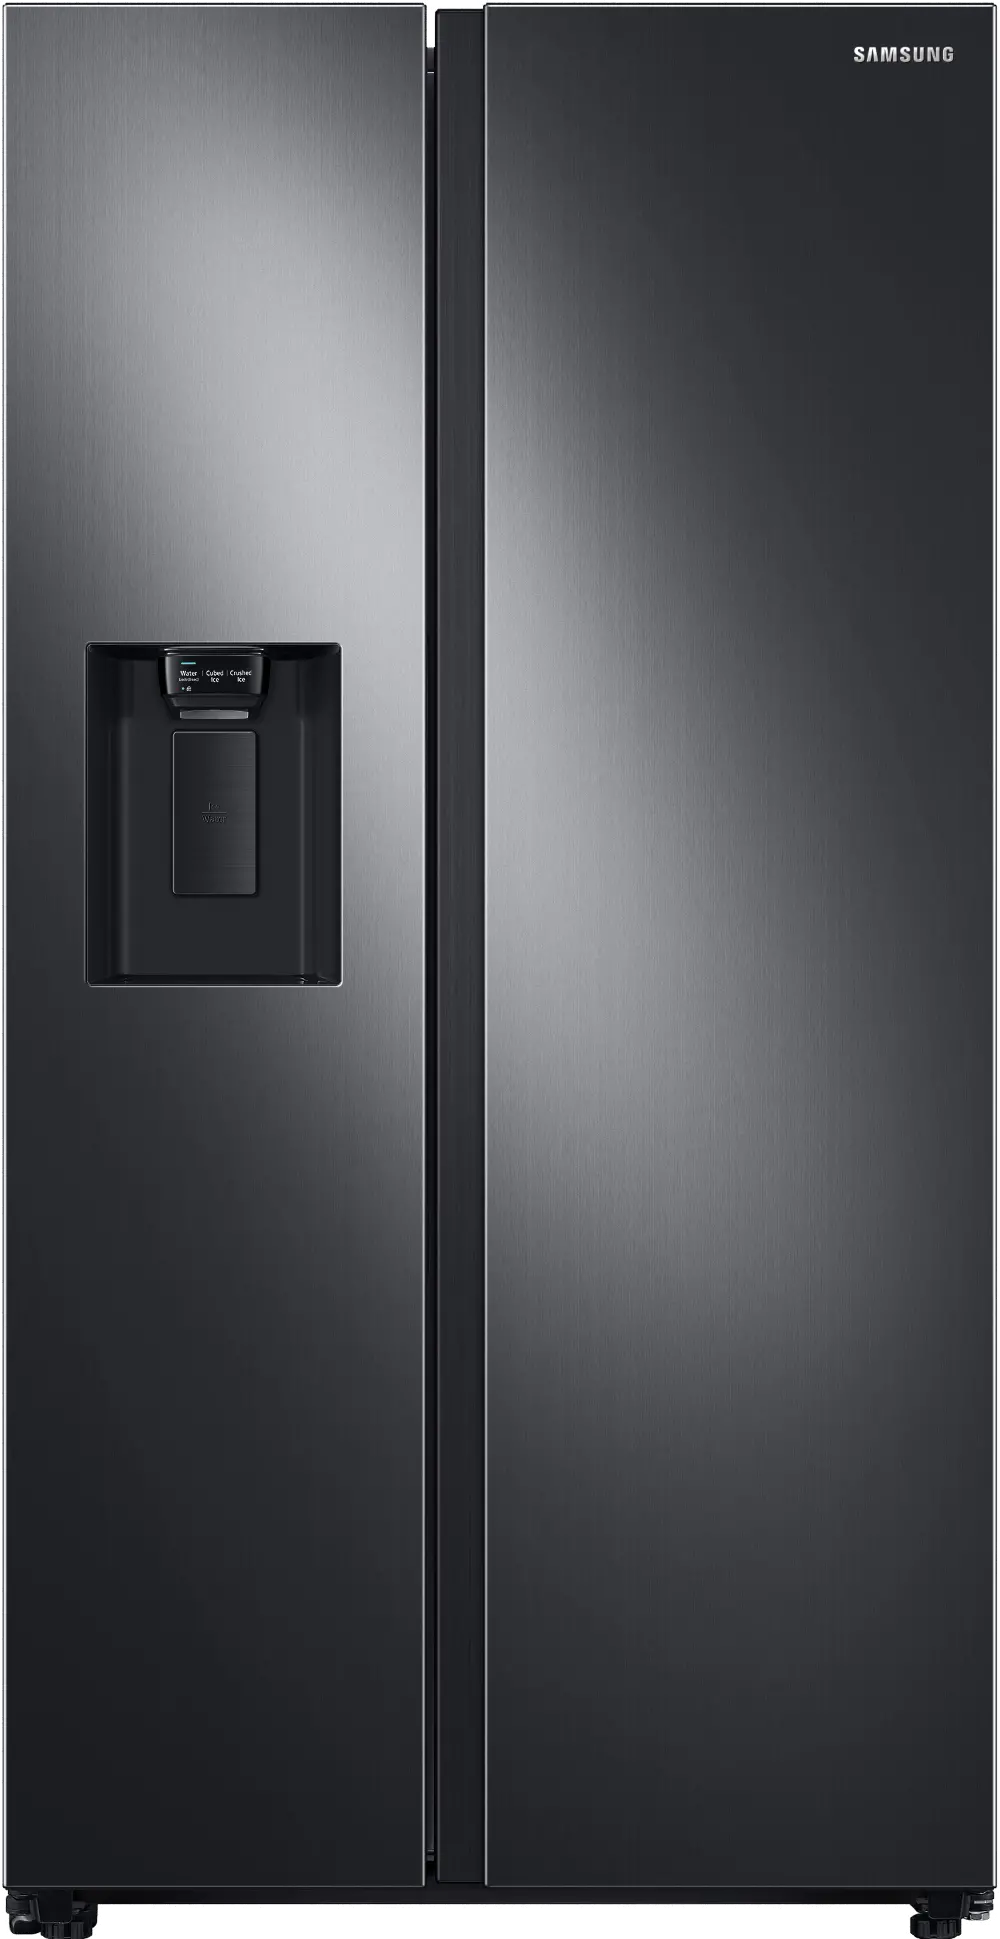 RS27T5200SG Samsung 27.4 cu ft Side by Side Refrigerator - Black Stainless Steel-1